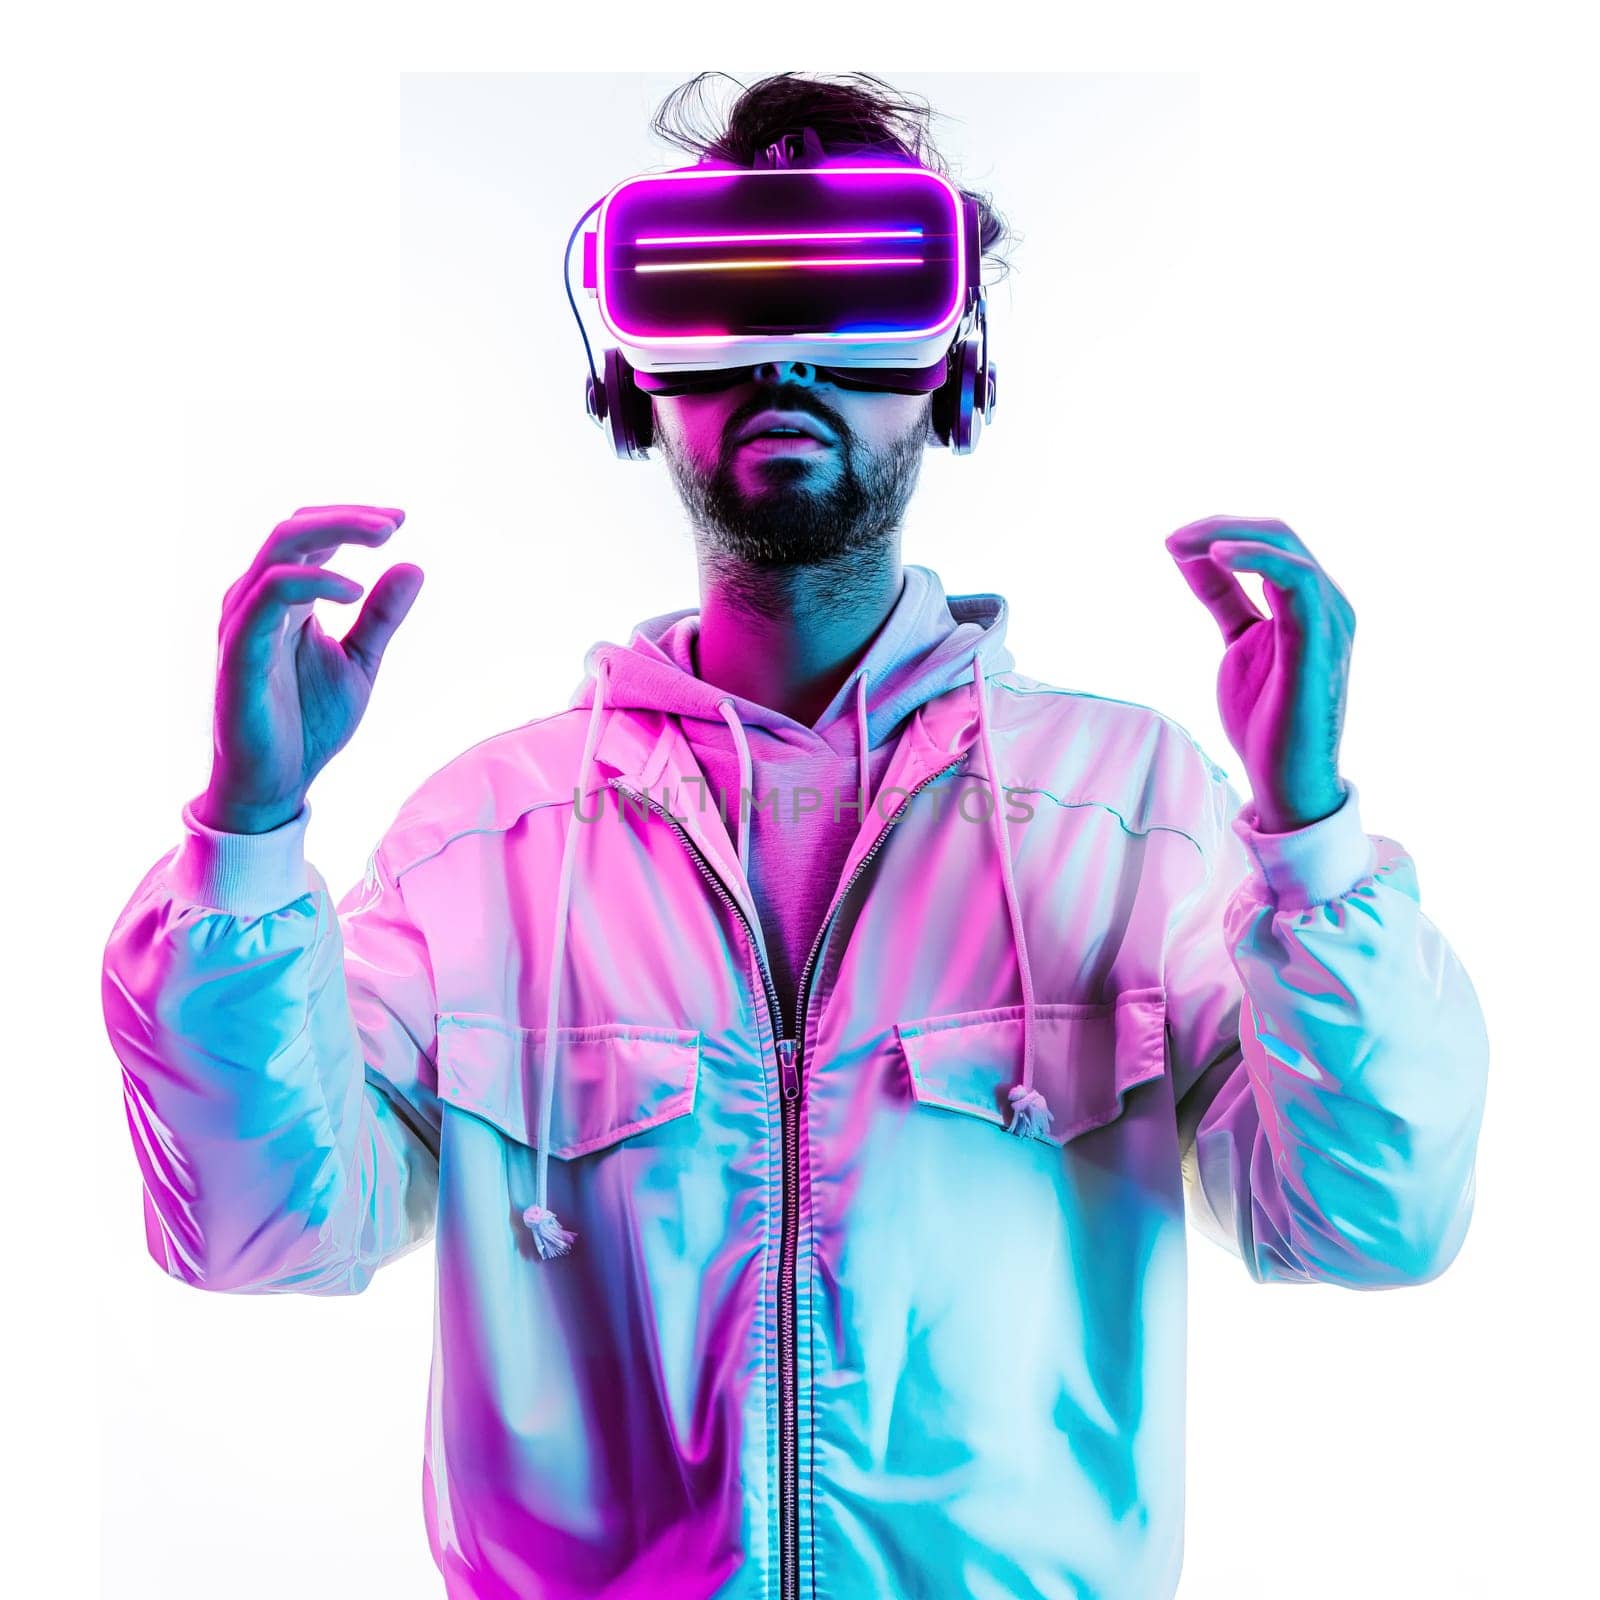 Man in VR glasses front view by Dustick